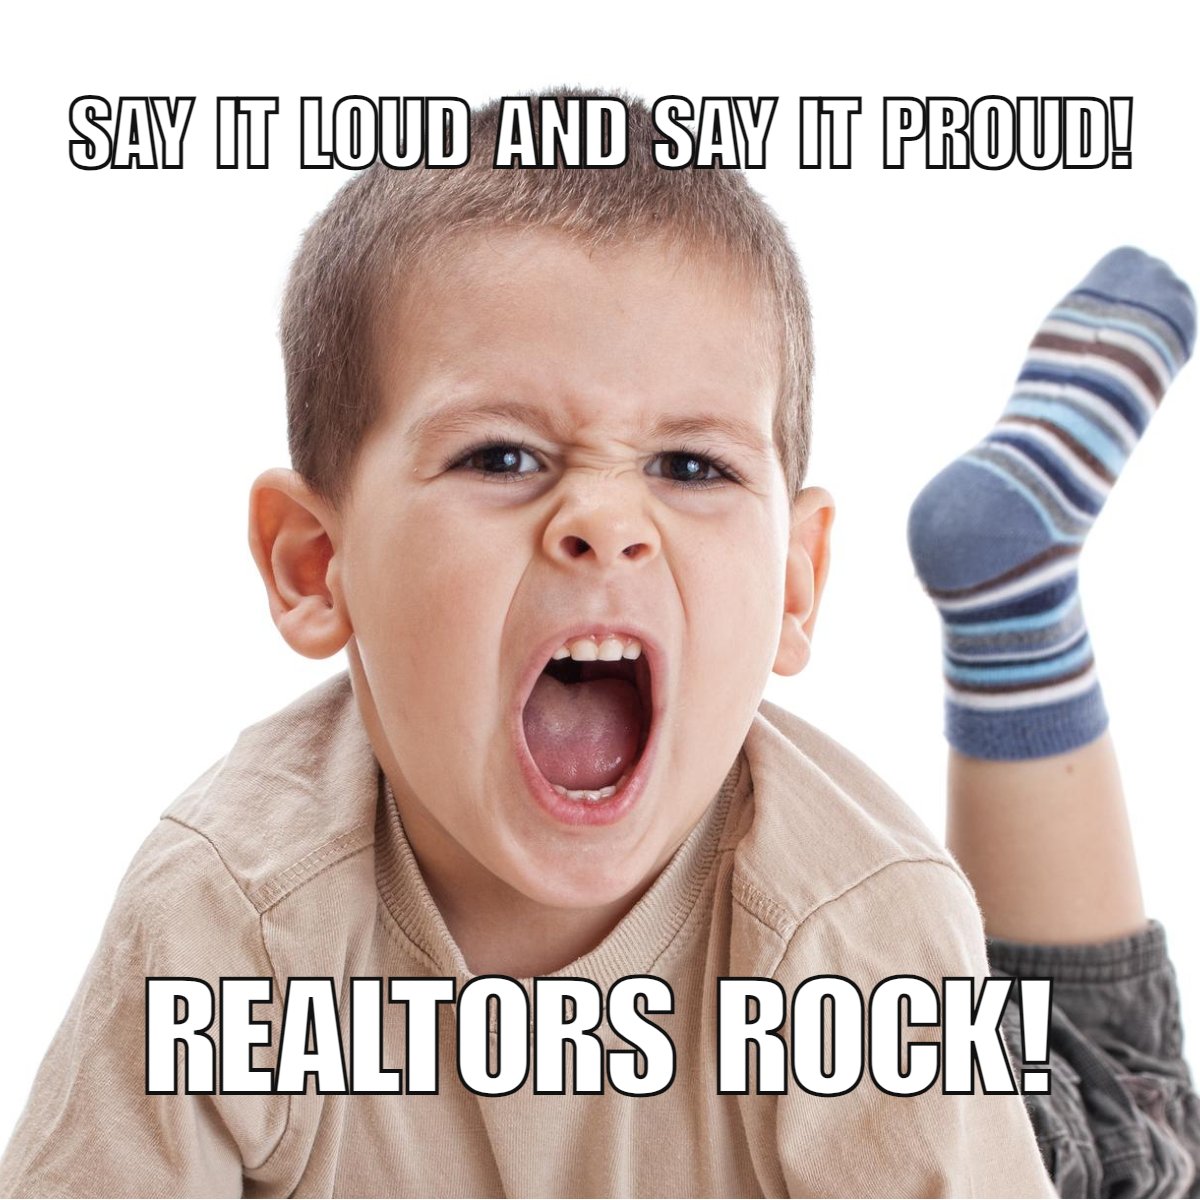 The unsung heroes of the real estate world!

Say it with me:

Realtors Rock!

 #RealEstateHeroes #HomeDreams
 #MyrtleBeach #SCRealEstate #Beachliving #BRGRealEstate #AndreaWhiteRealtor #SouthCarolinaHome #MovetoMyrtleBeach #BeachLifeSC #SCCountryLiving